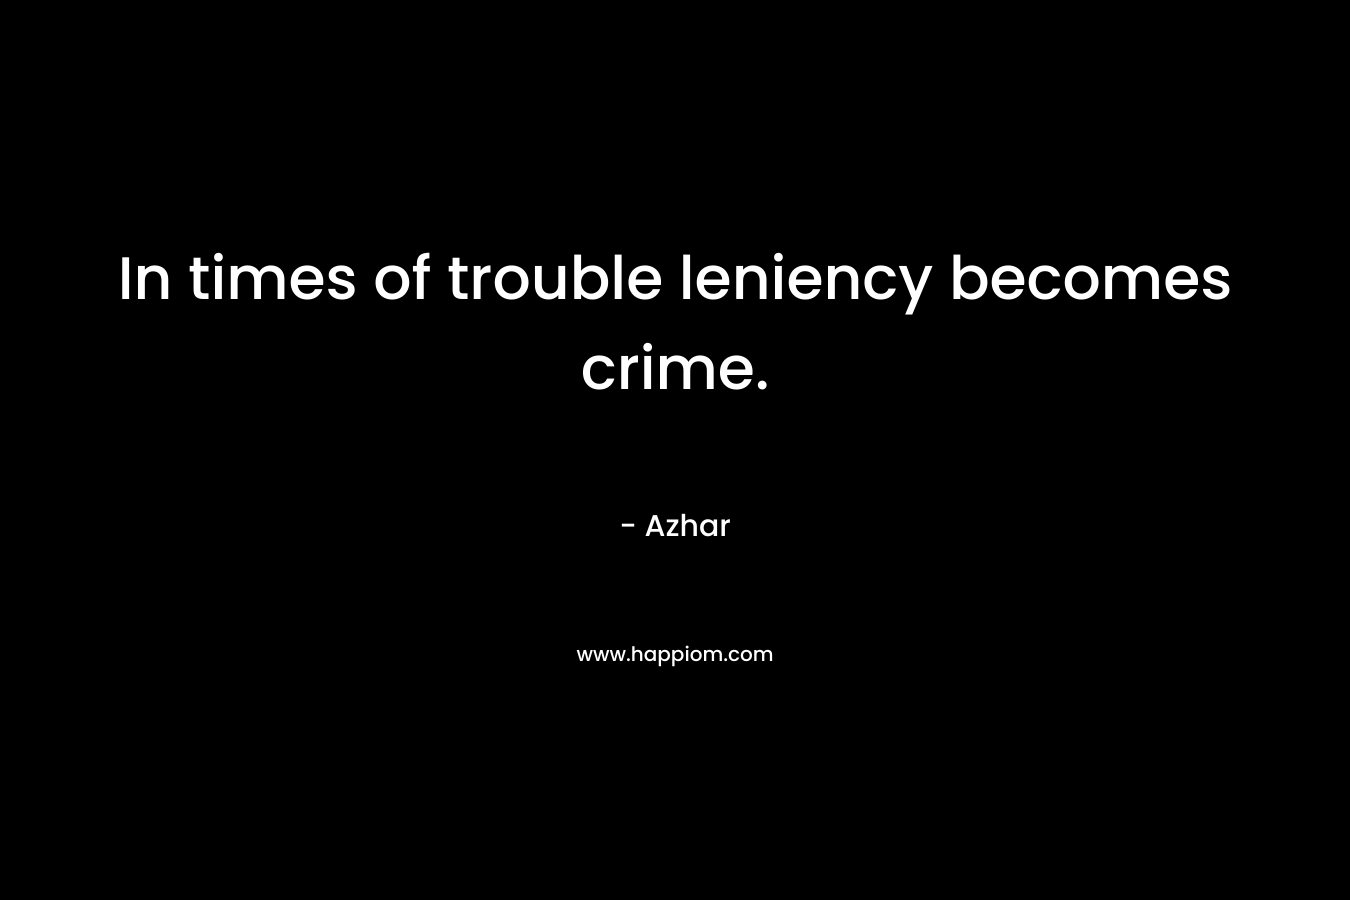 In times of trouble leniency becomes crime. – Azhar